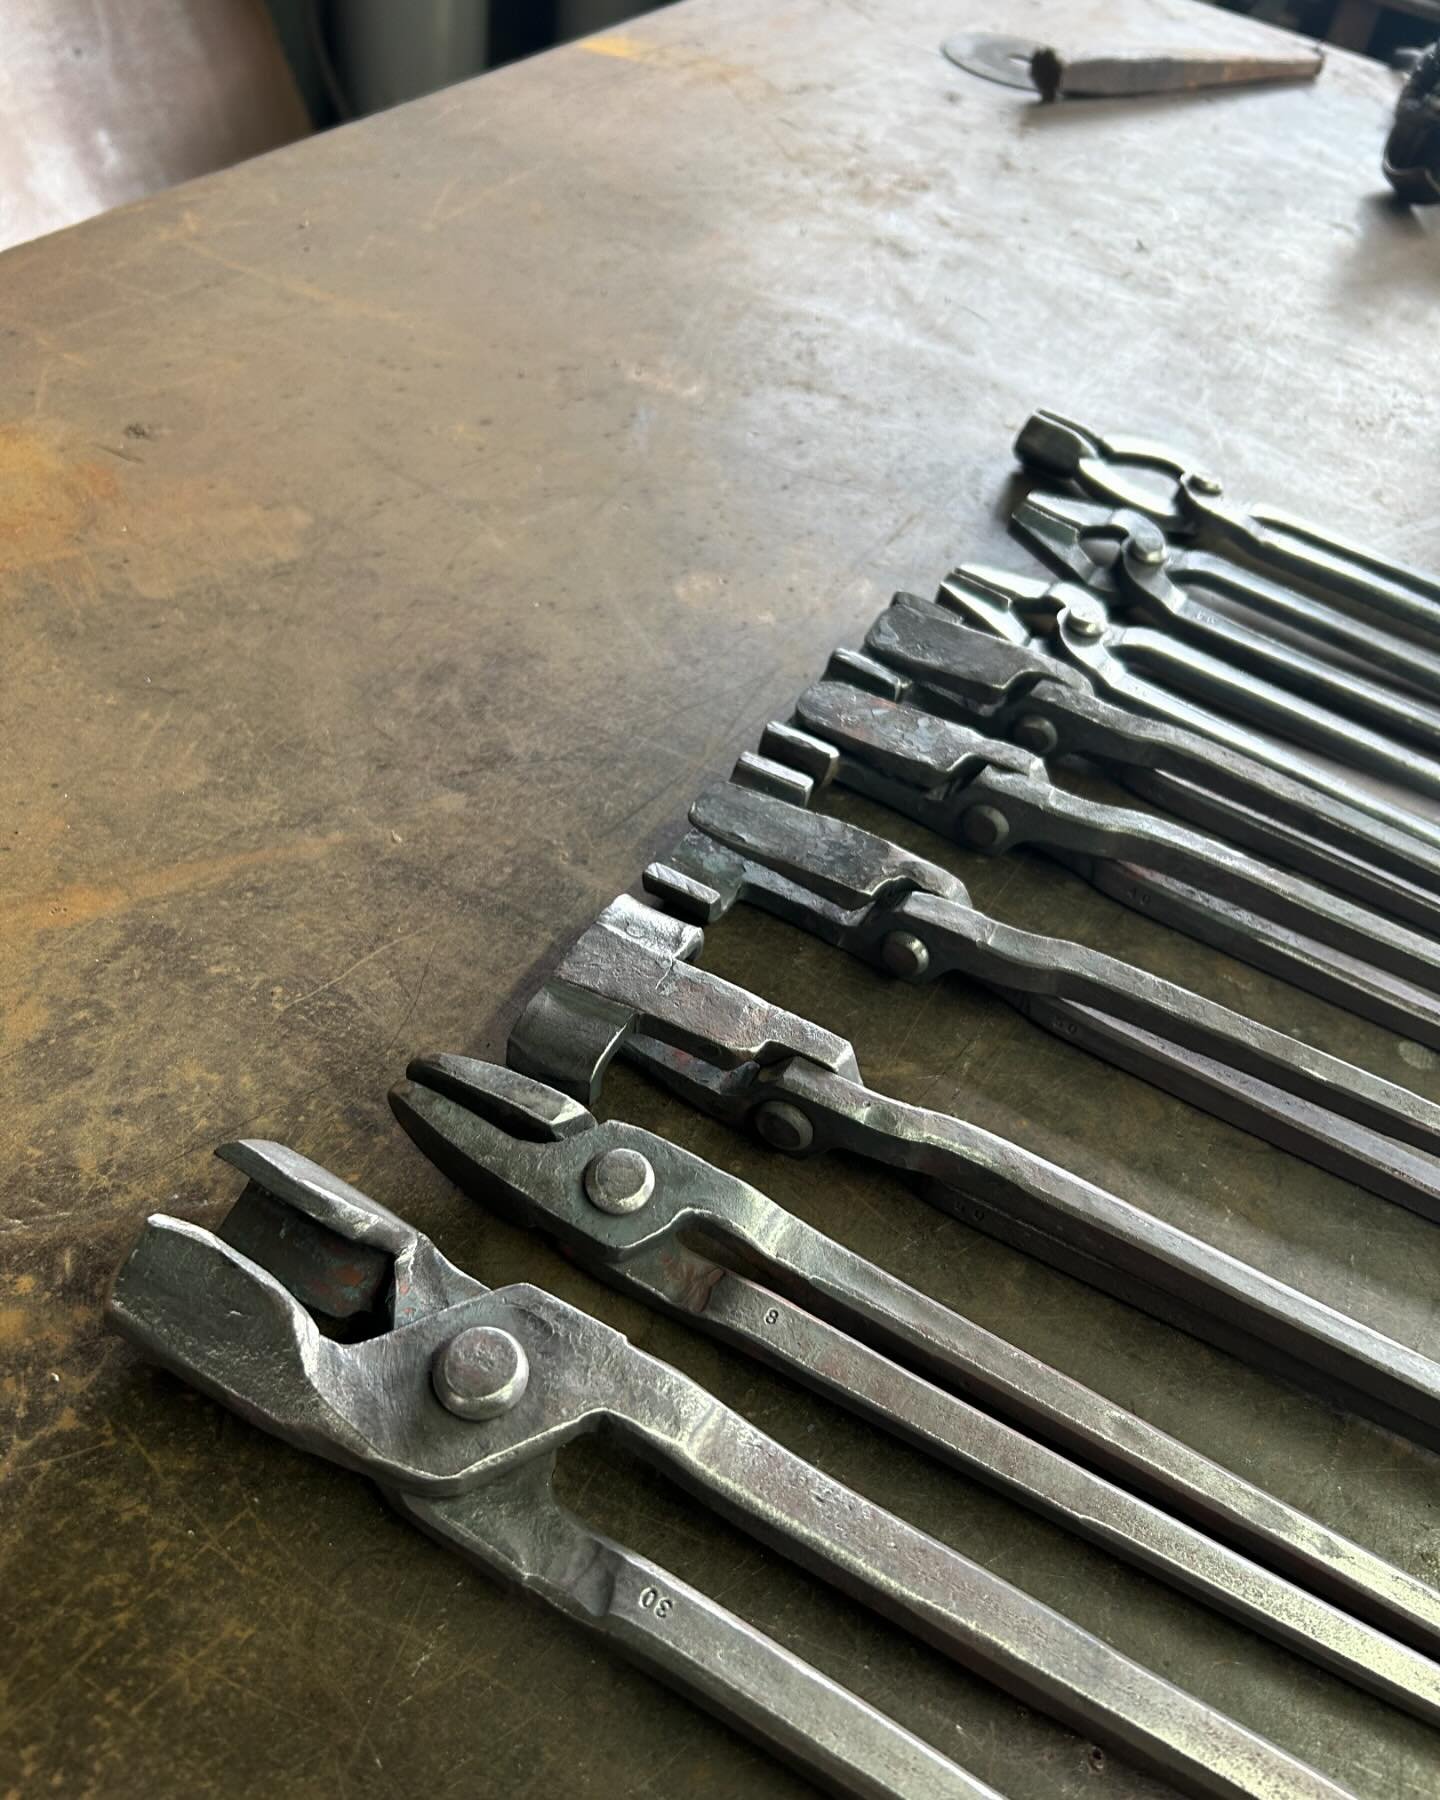 Nearly every pair of tongs on the bench yesterday was custom ordered, if you ever need tools you can&rsquo;t see on my website (link below) just send me a message and I will give you a price!

https://www.design-in-metal.com/tool-shop 

#forged #blac